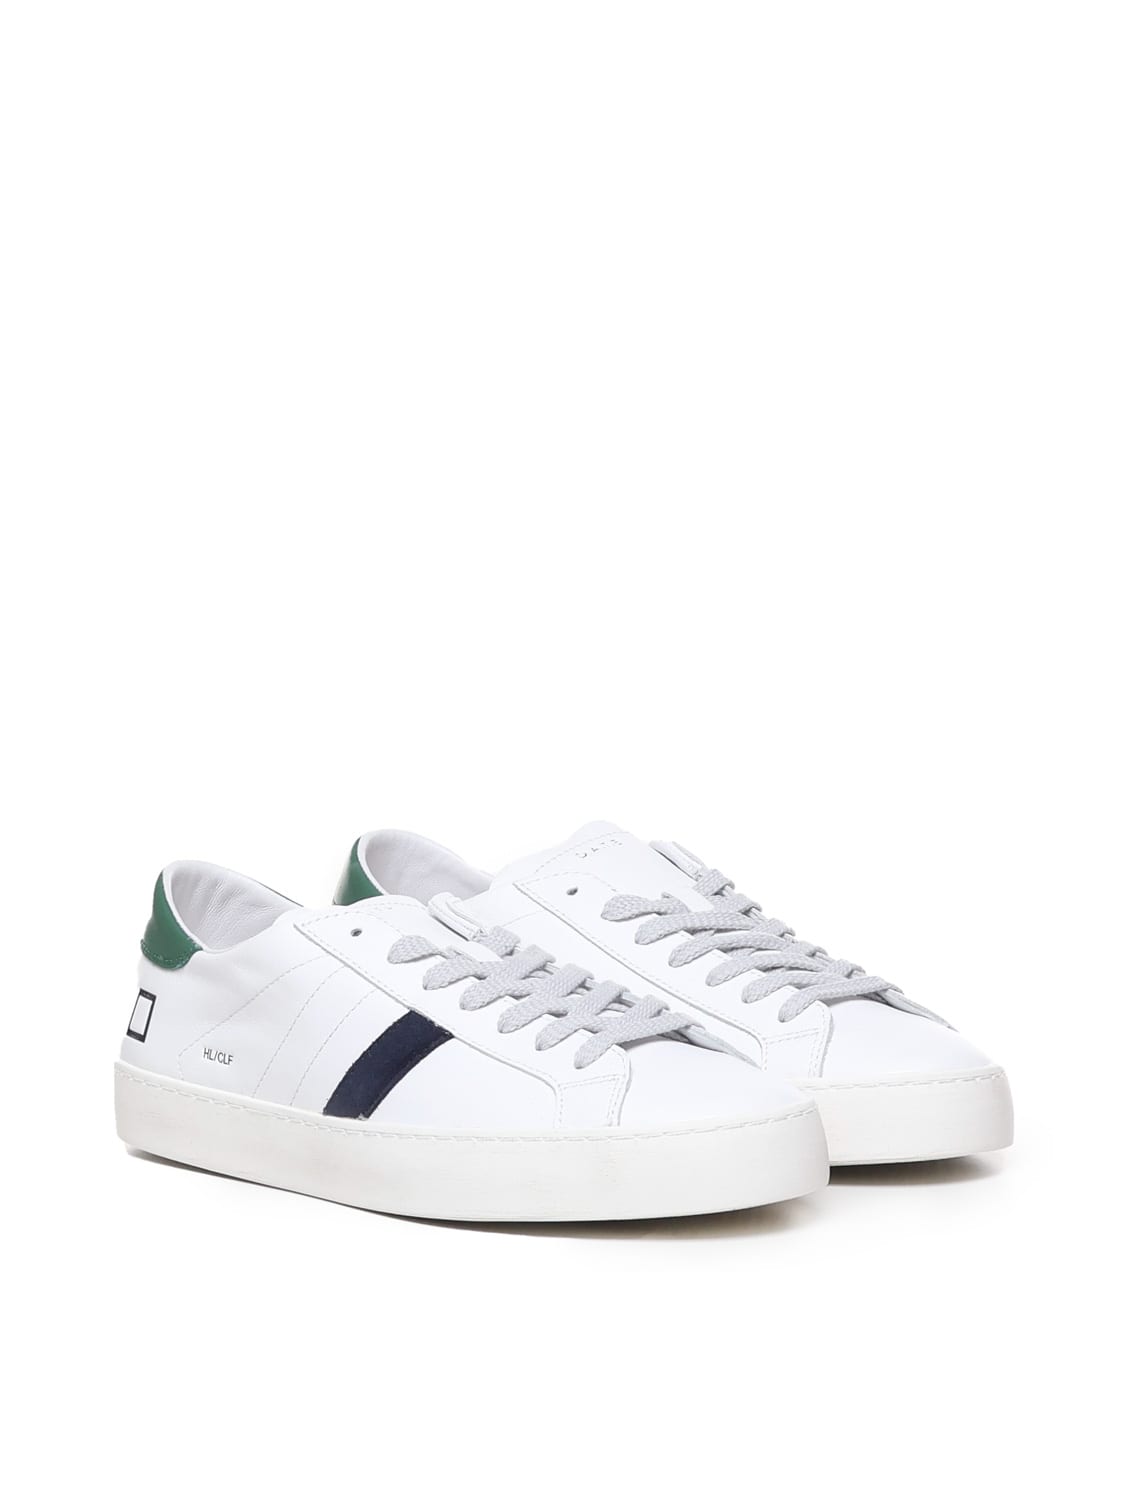 Shop Date Hill Low Sneakers In White-green